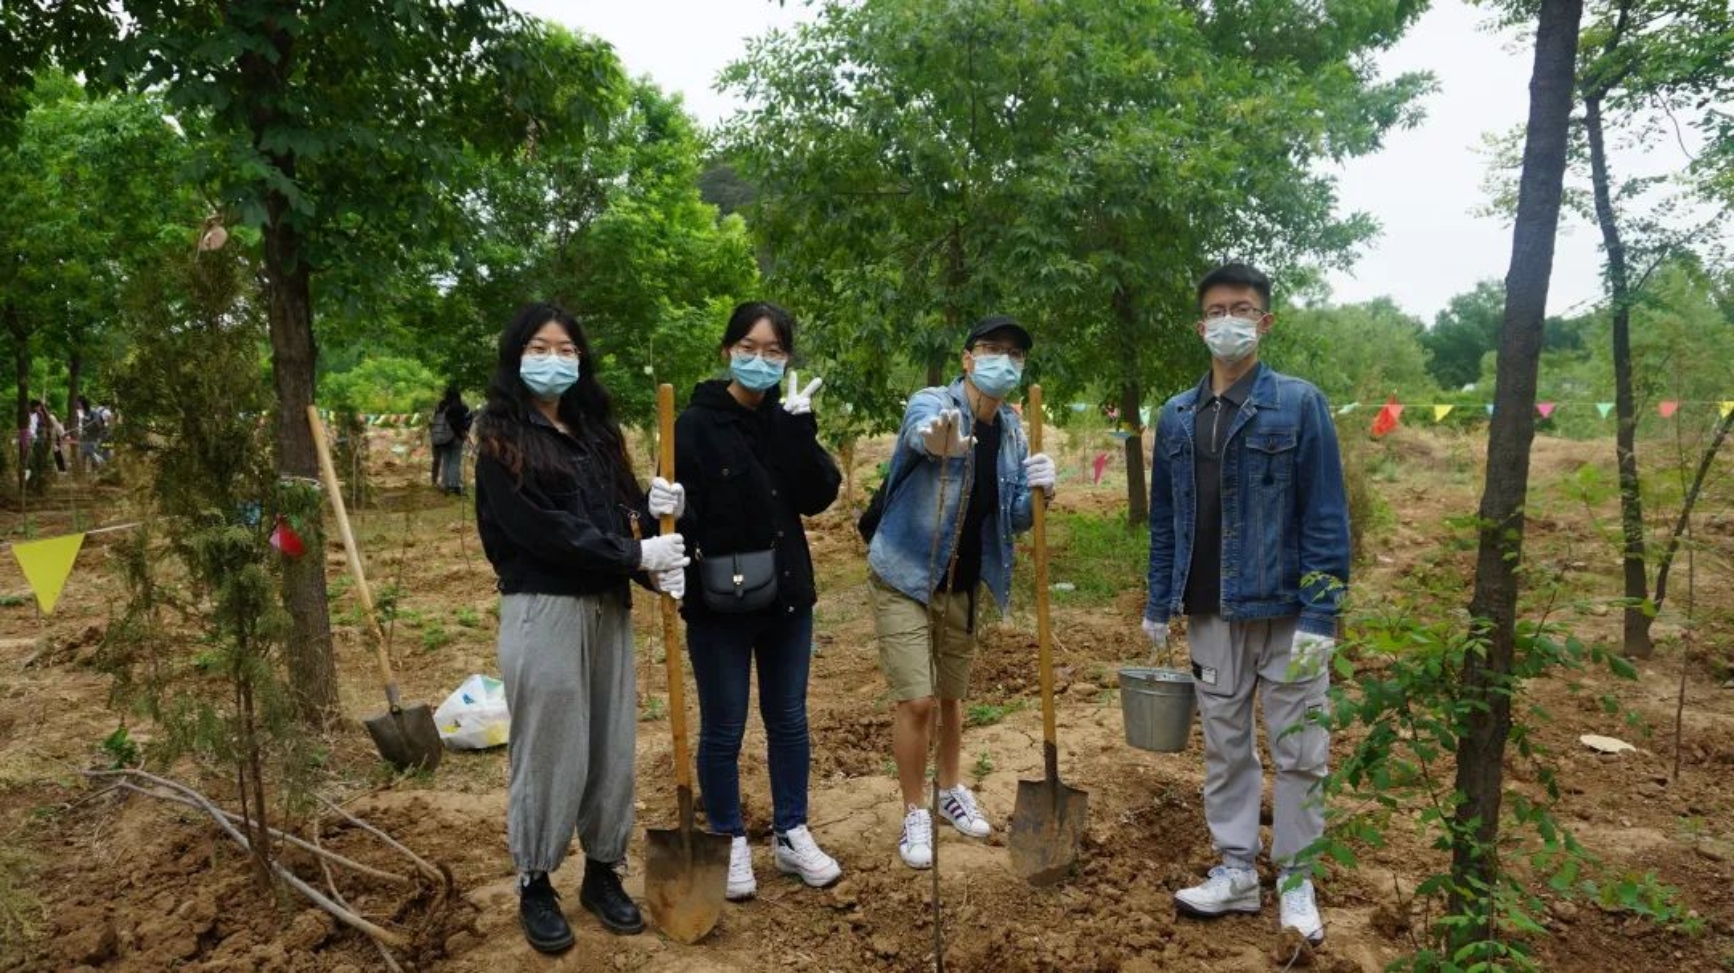 "Plant and Visit Together with You" : SJC holds spring tree planting activity jointly with the School of Astronautics of Beihang